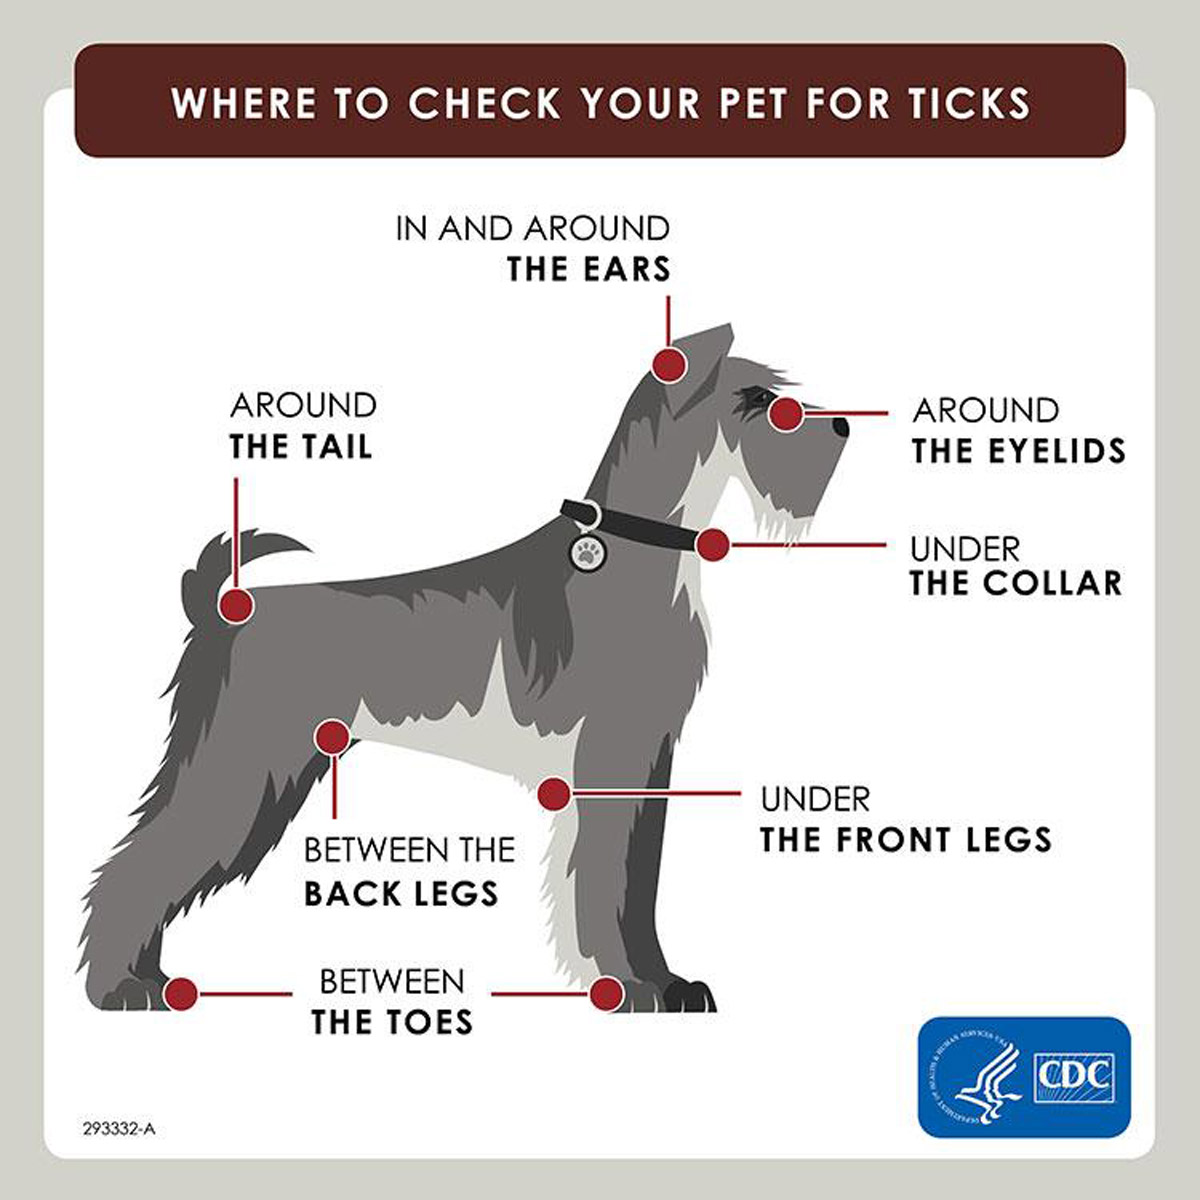 4 Precautionary Measures to Protect Your Pet From Tick-borne Diseases